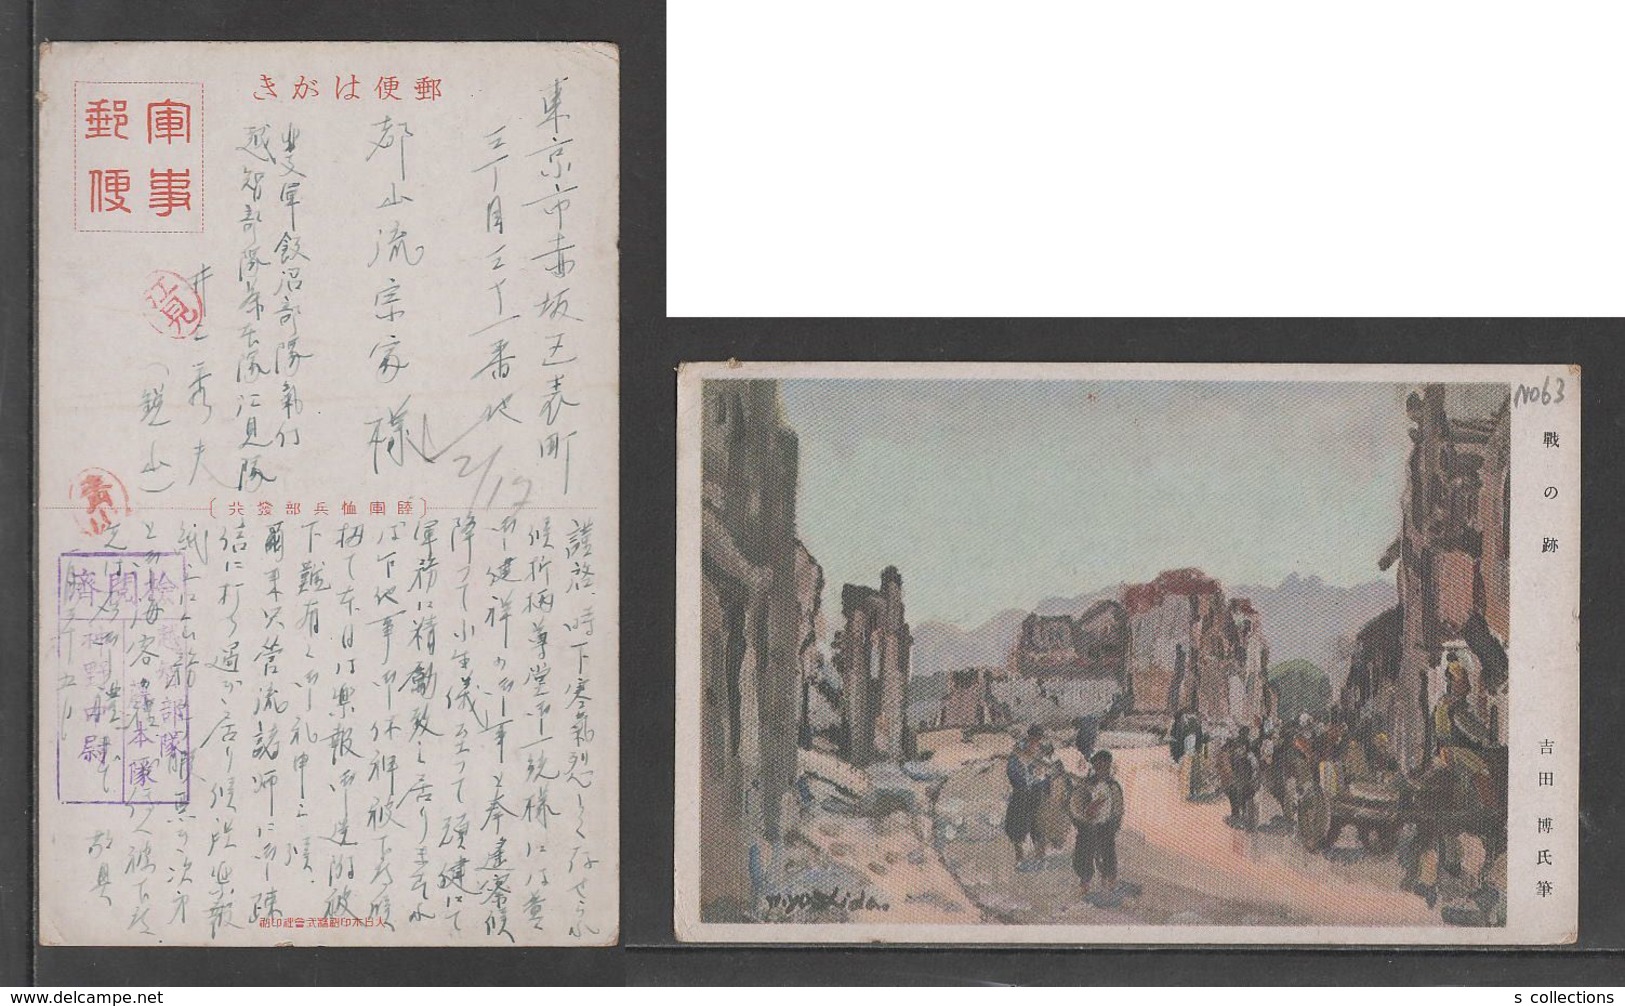 JAPAN WWII Military Old Battlefield Picture Postcard NORTH CHINA WW2 MANCHURIA CHINE MANDCHOUKOUO JAPON GIAPPONE - 1941-45 Northern China